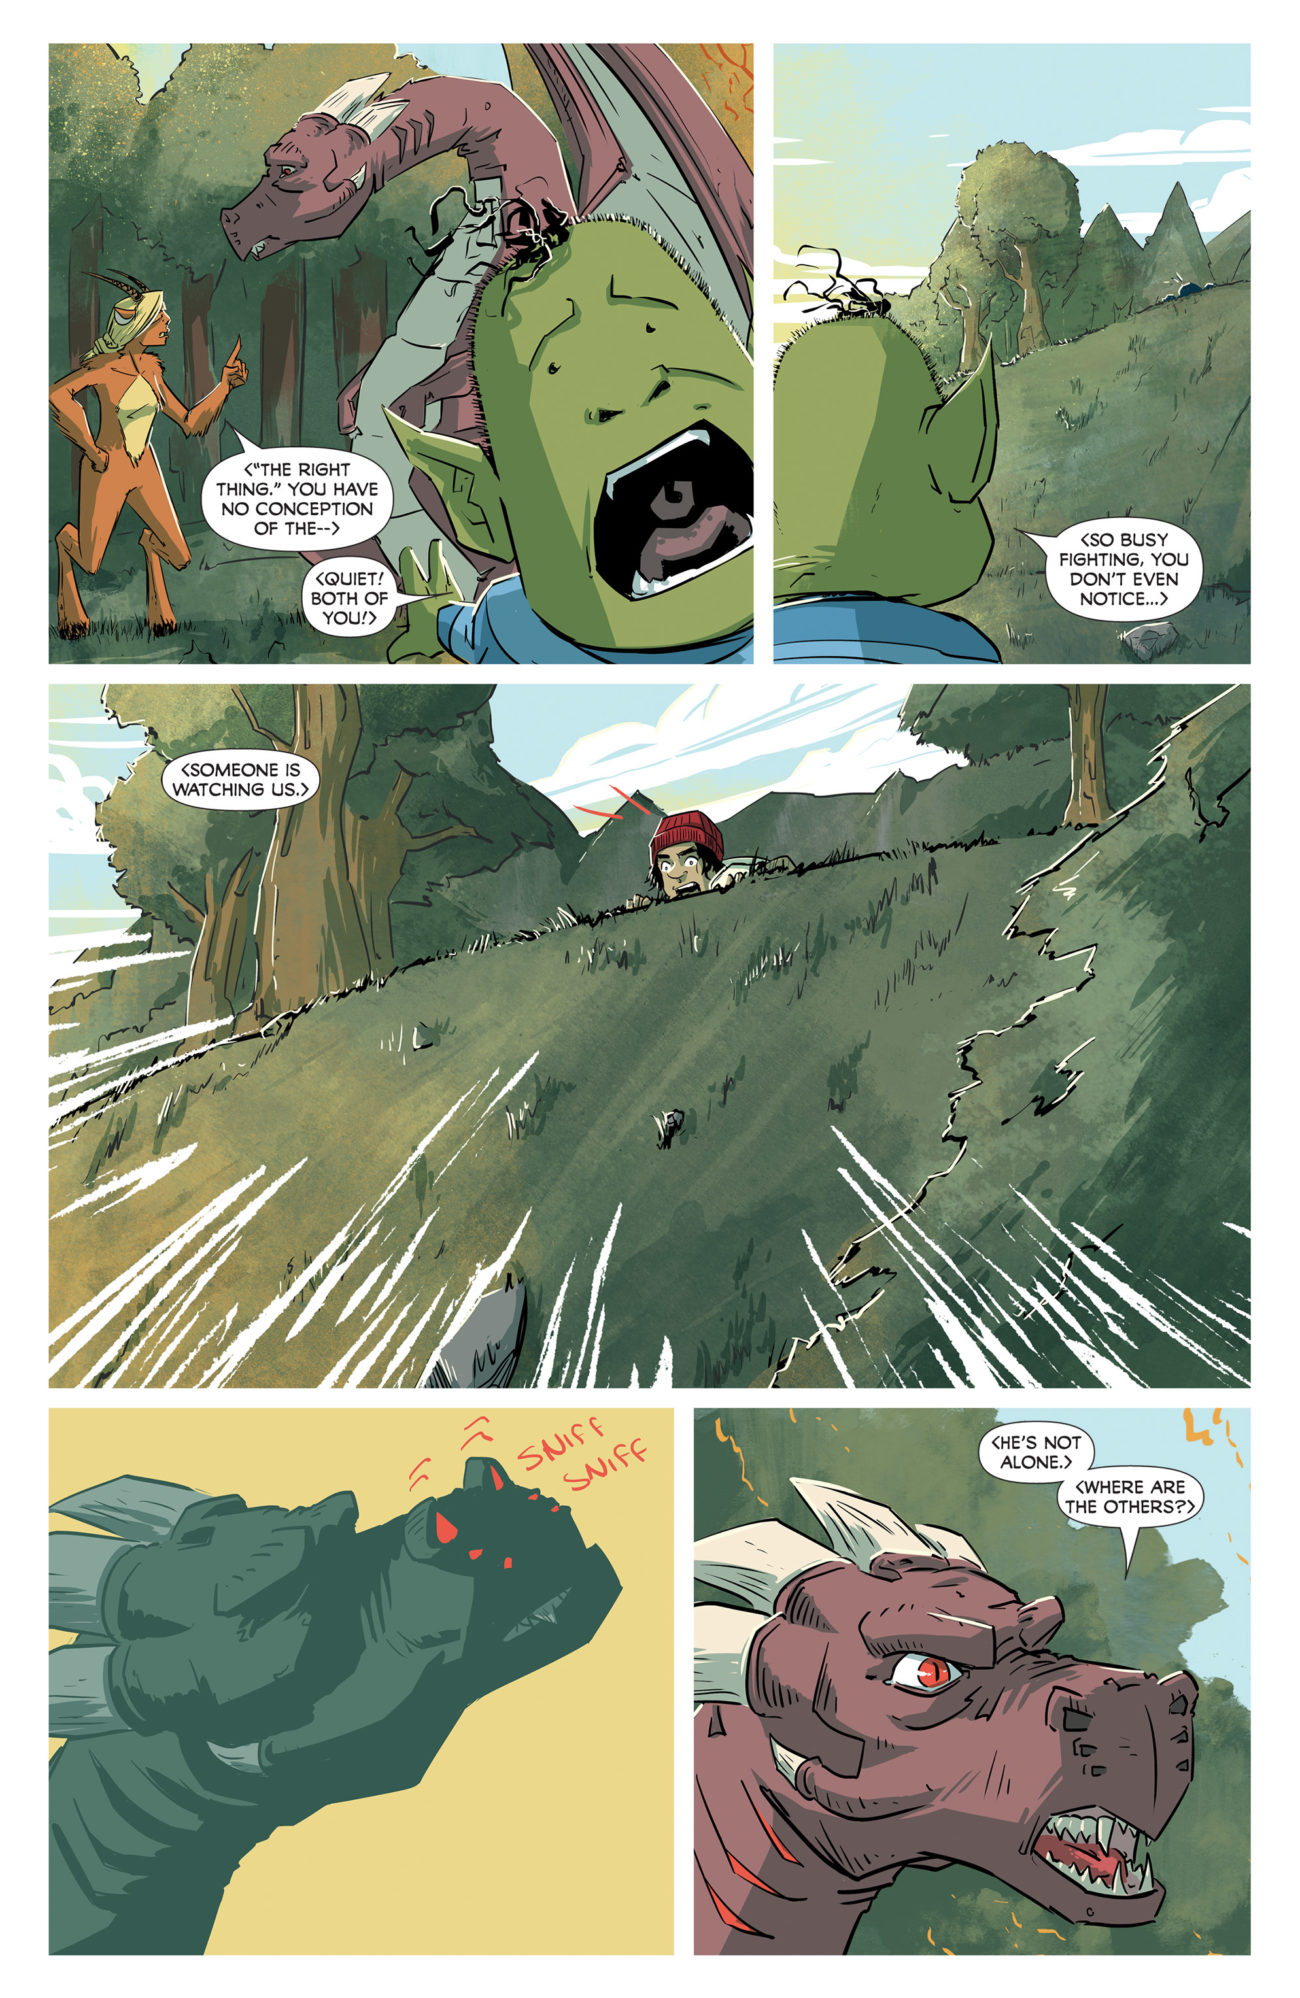 Past the Last Mountain #2 - Page 3